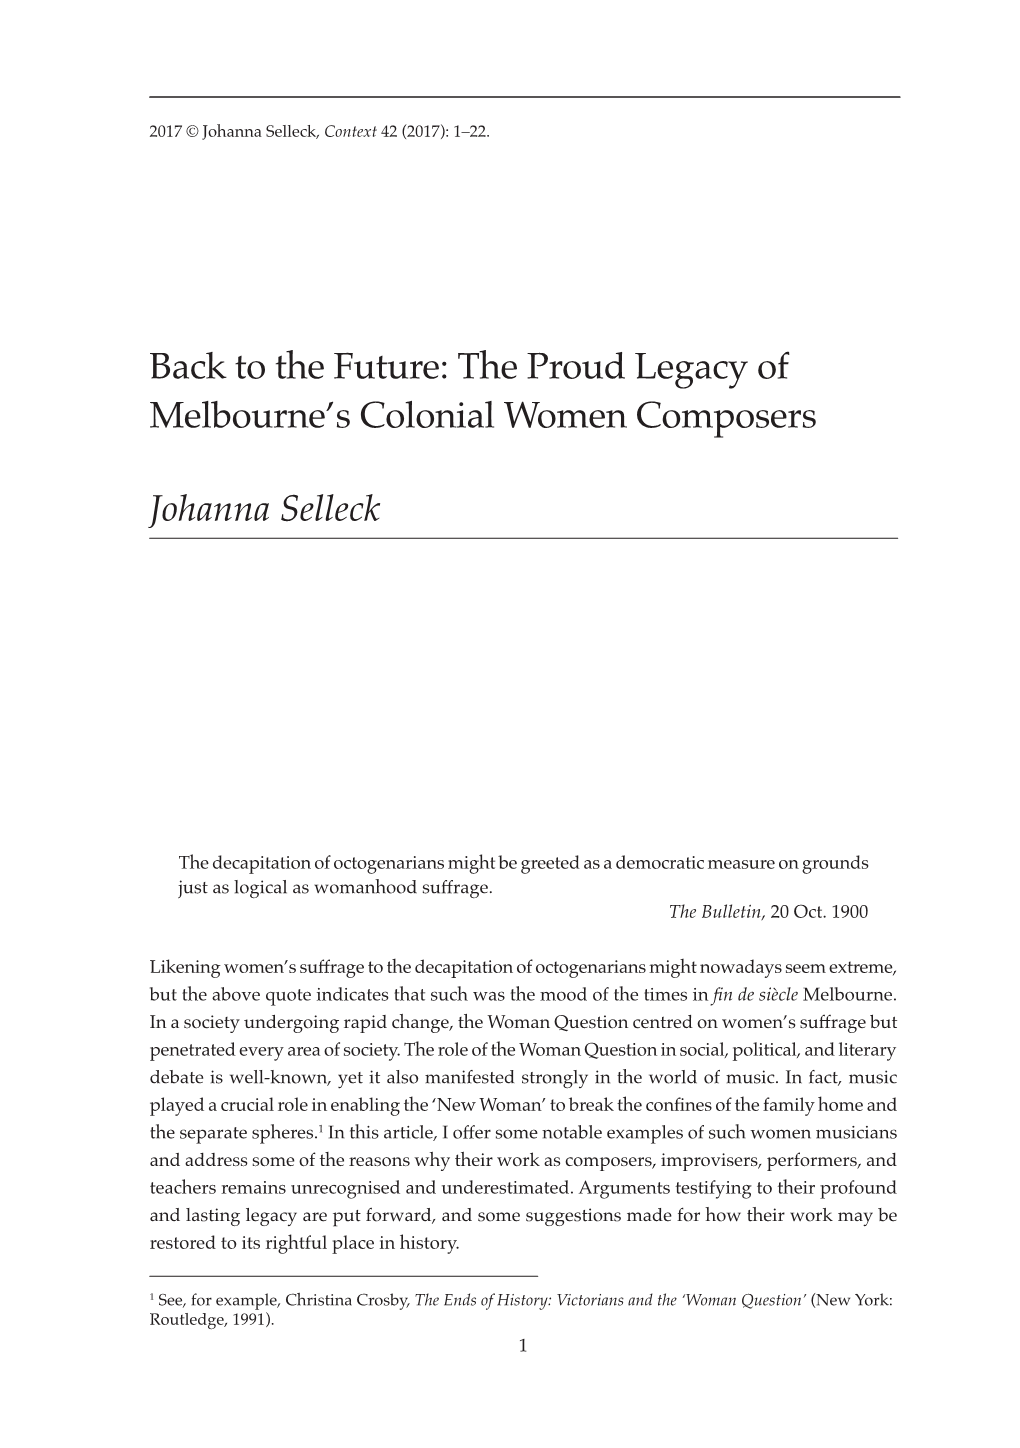 The Future: the Proud Legacy of Melbourne's Colonial Women Composers Johanna Selleck